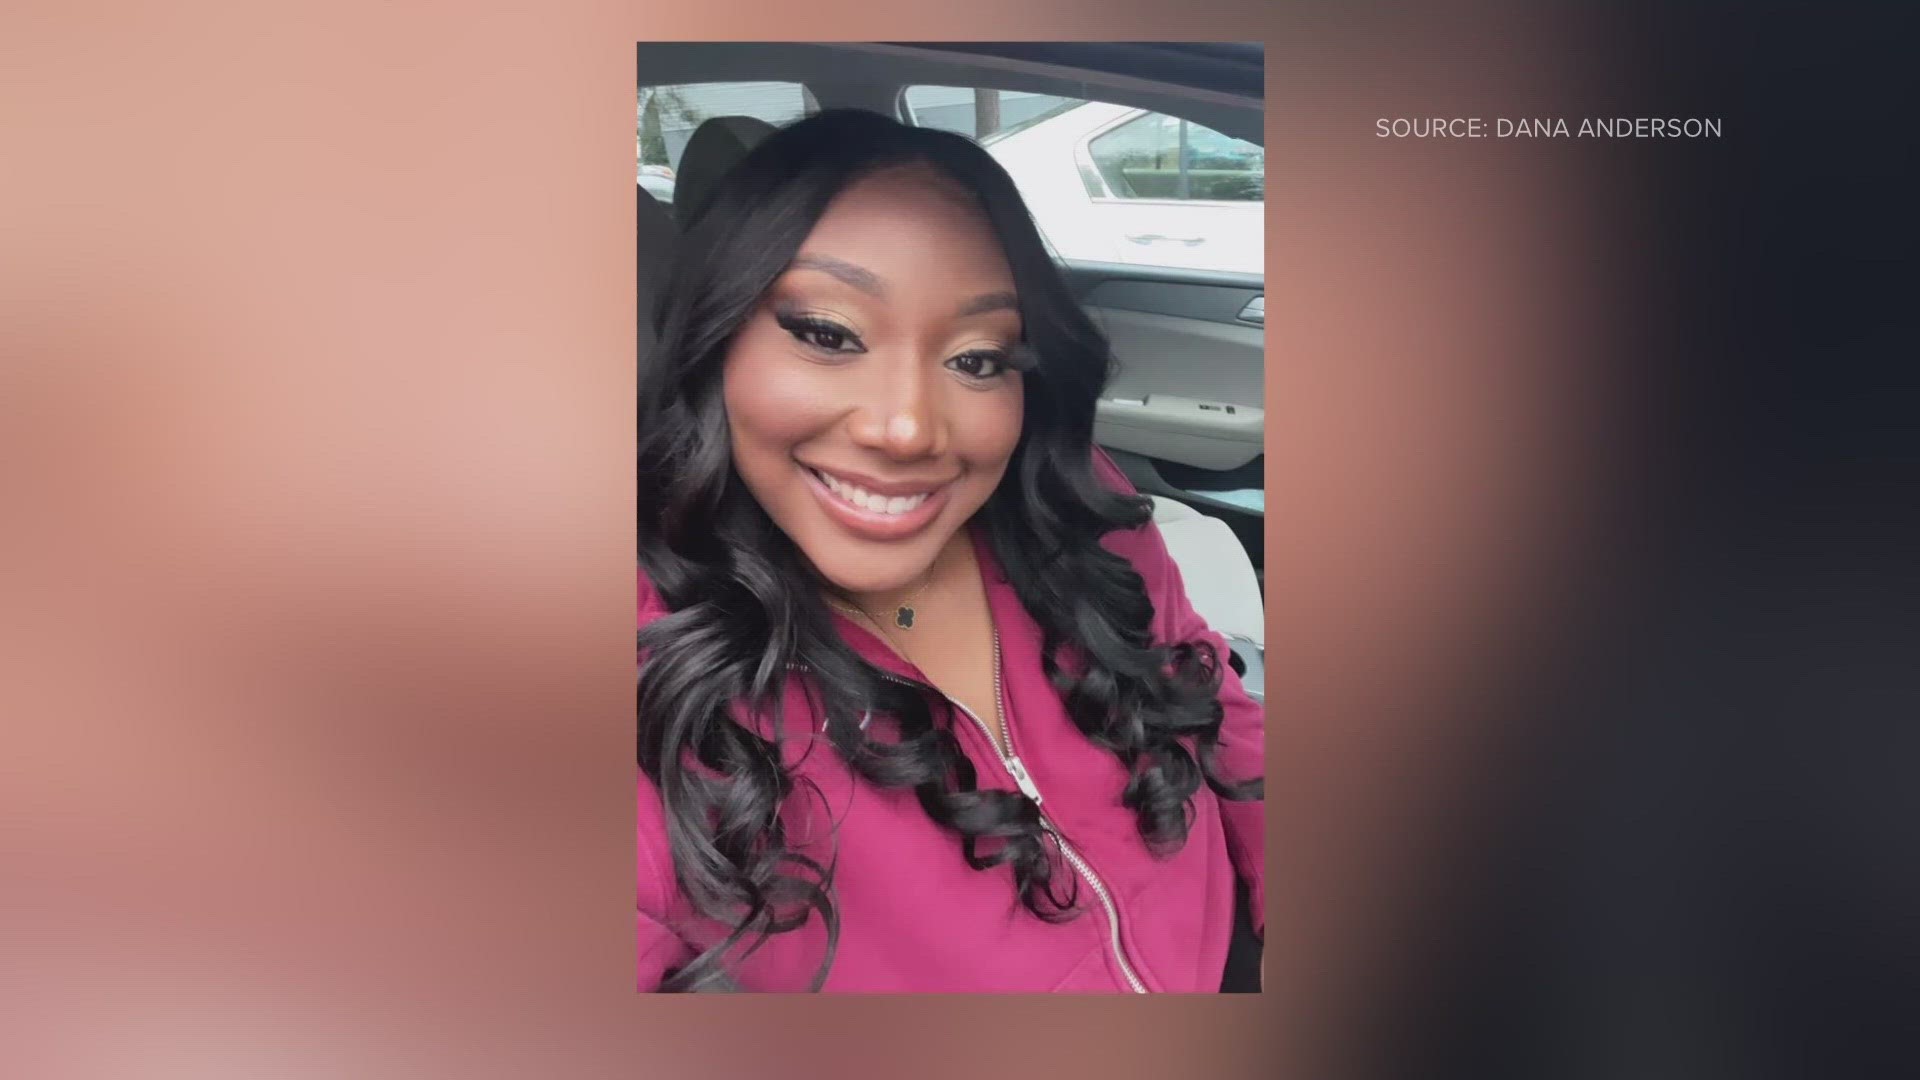 Xiomara Moore died on April 13 after a deadly hit-and-run.